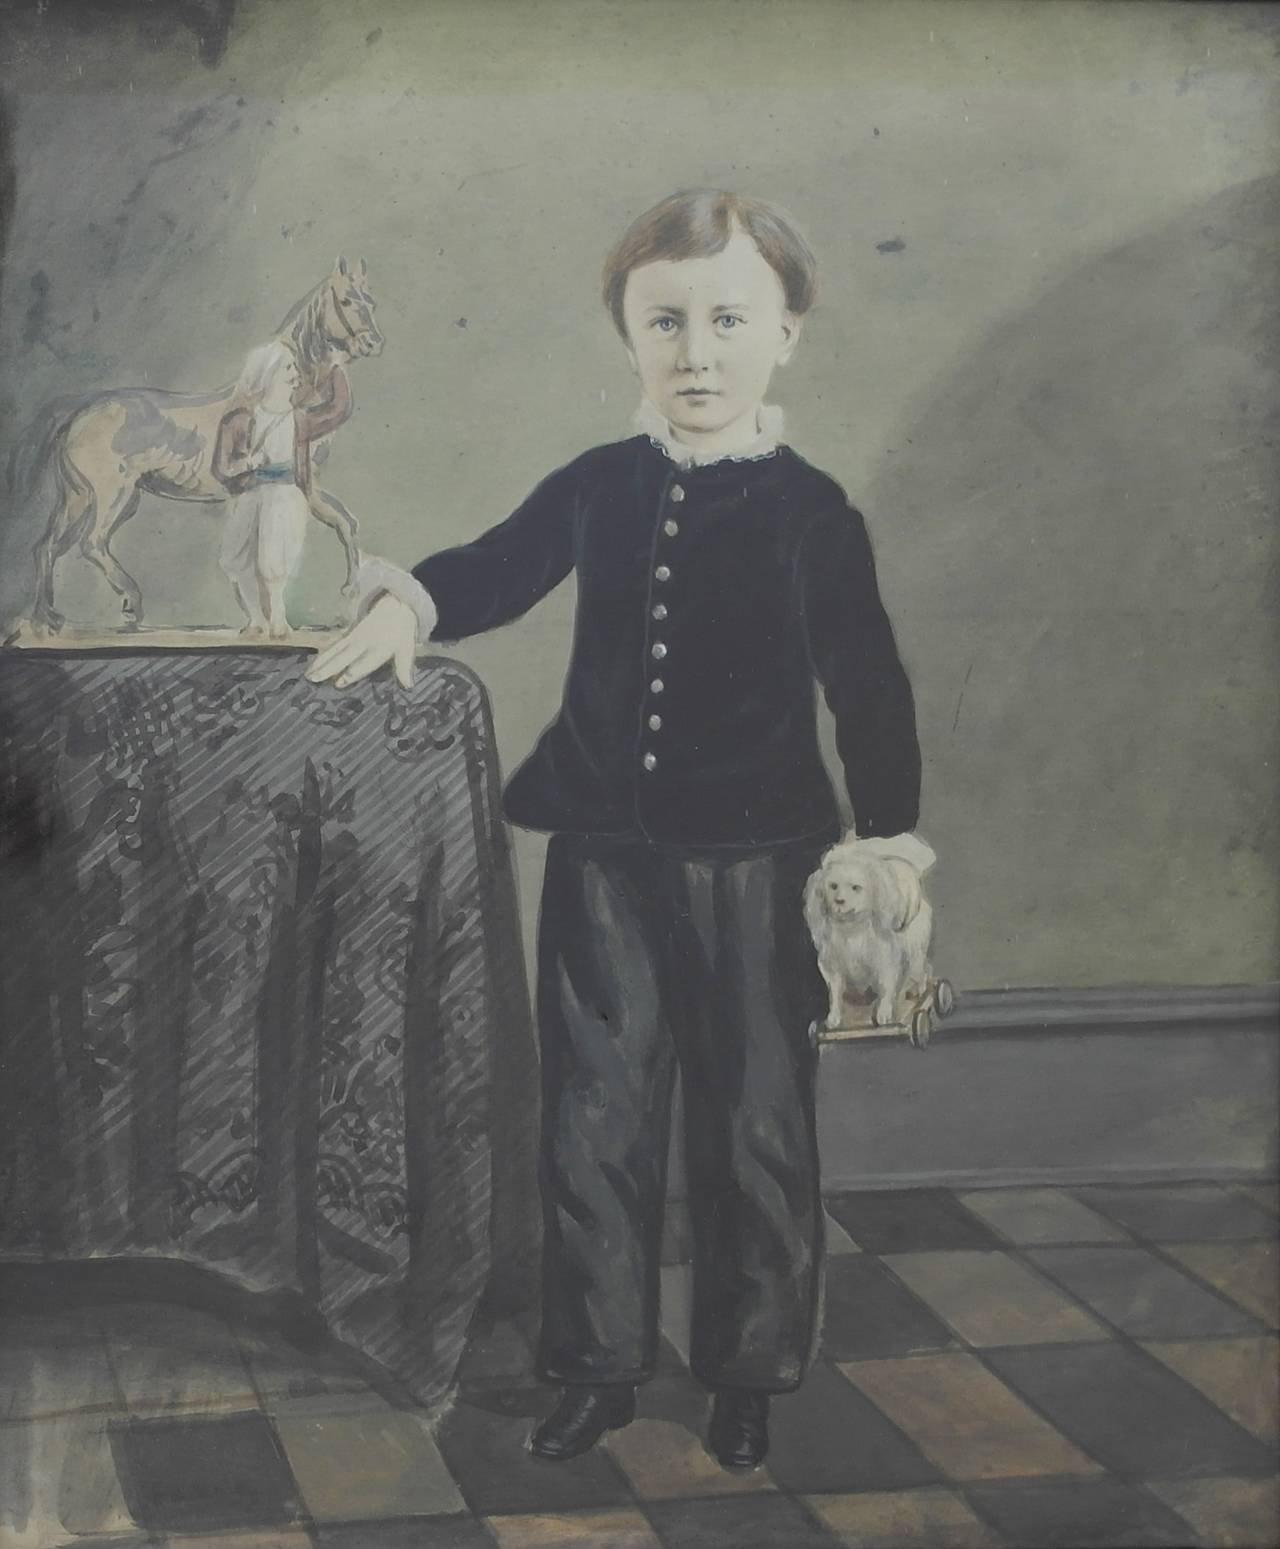 Being offered is a 19th century watercolor portrait of a young boy holding a dog pull toy; well-dressed child leans on a table displaying a horse and rider toy. Note the richness in detail on the table cover and checkered floor. Dimensions: 14